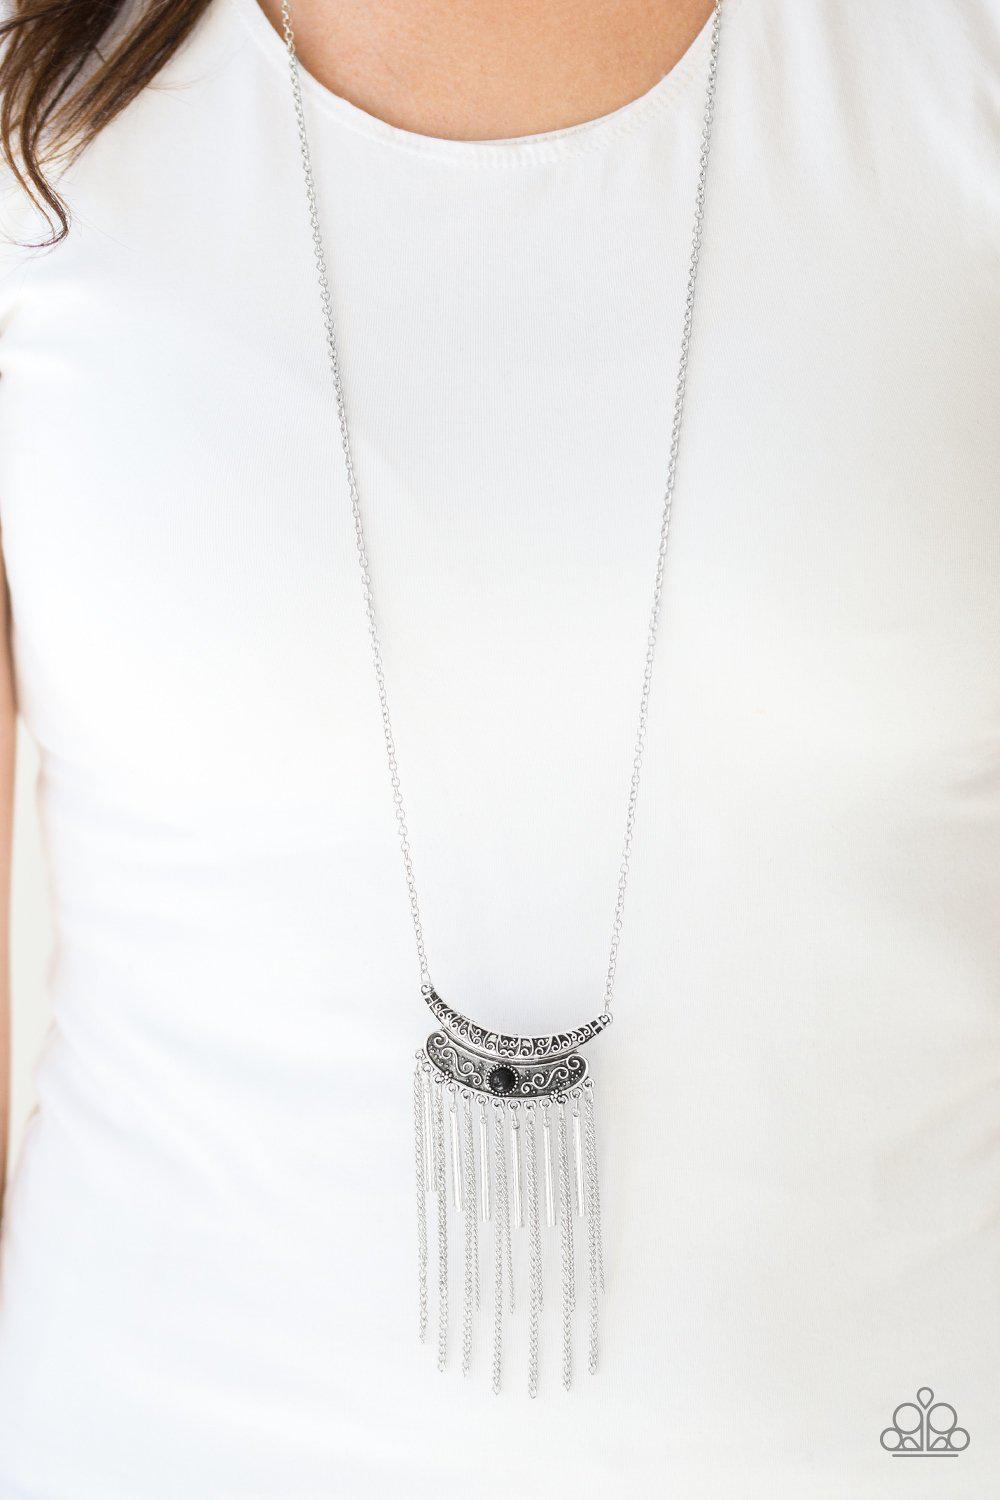 Take Zen Black and Silver Necklace - Paparazzi Accessories-CarasShop.com - $5 Jewelry by Cara Jewels